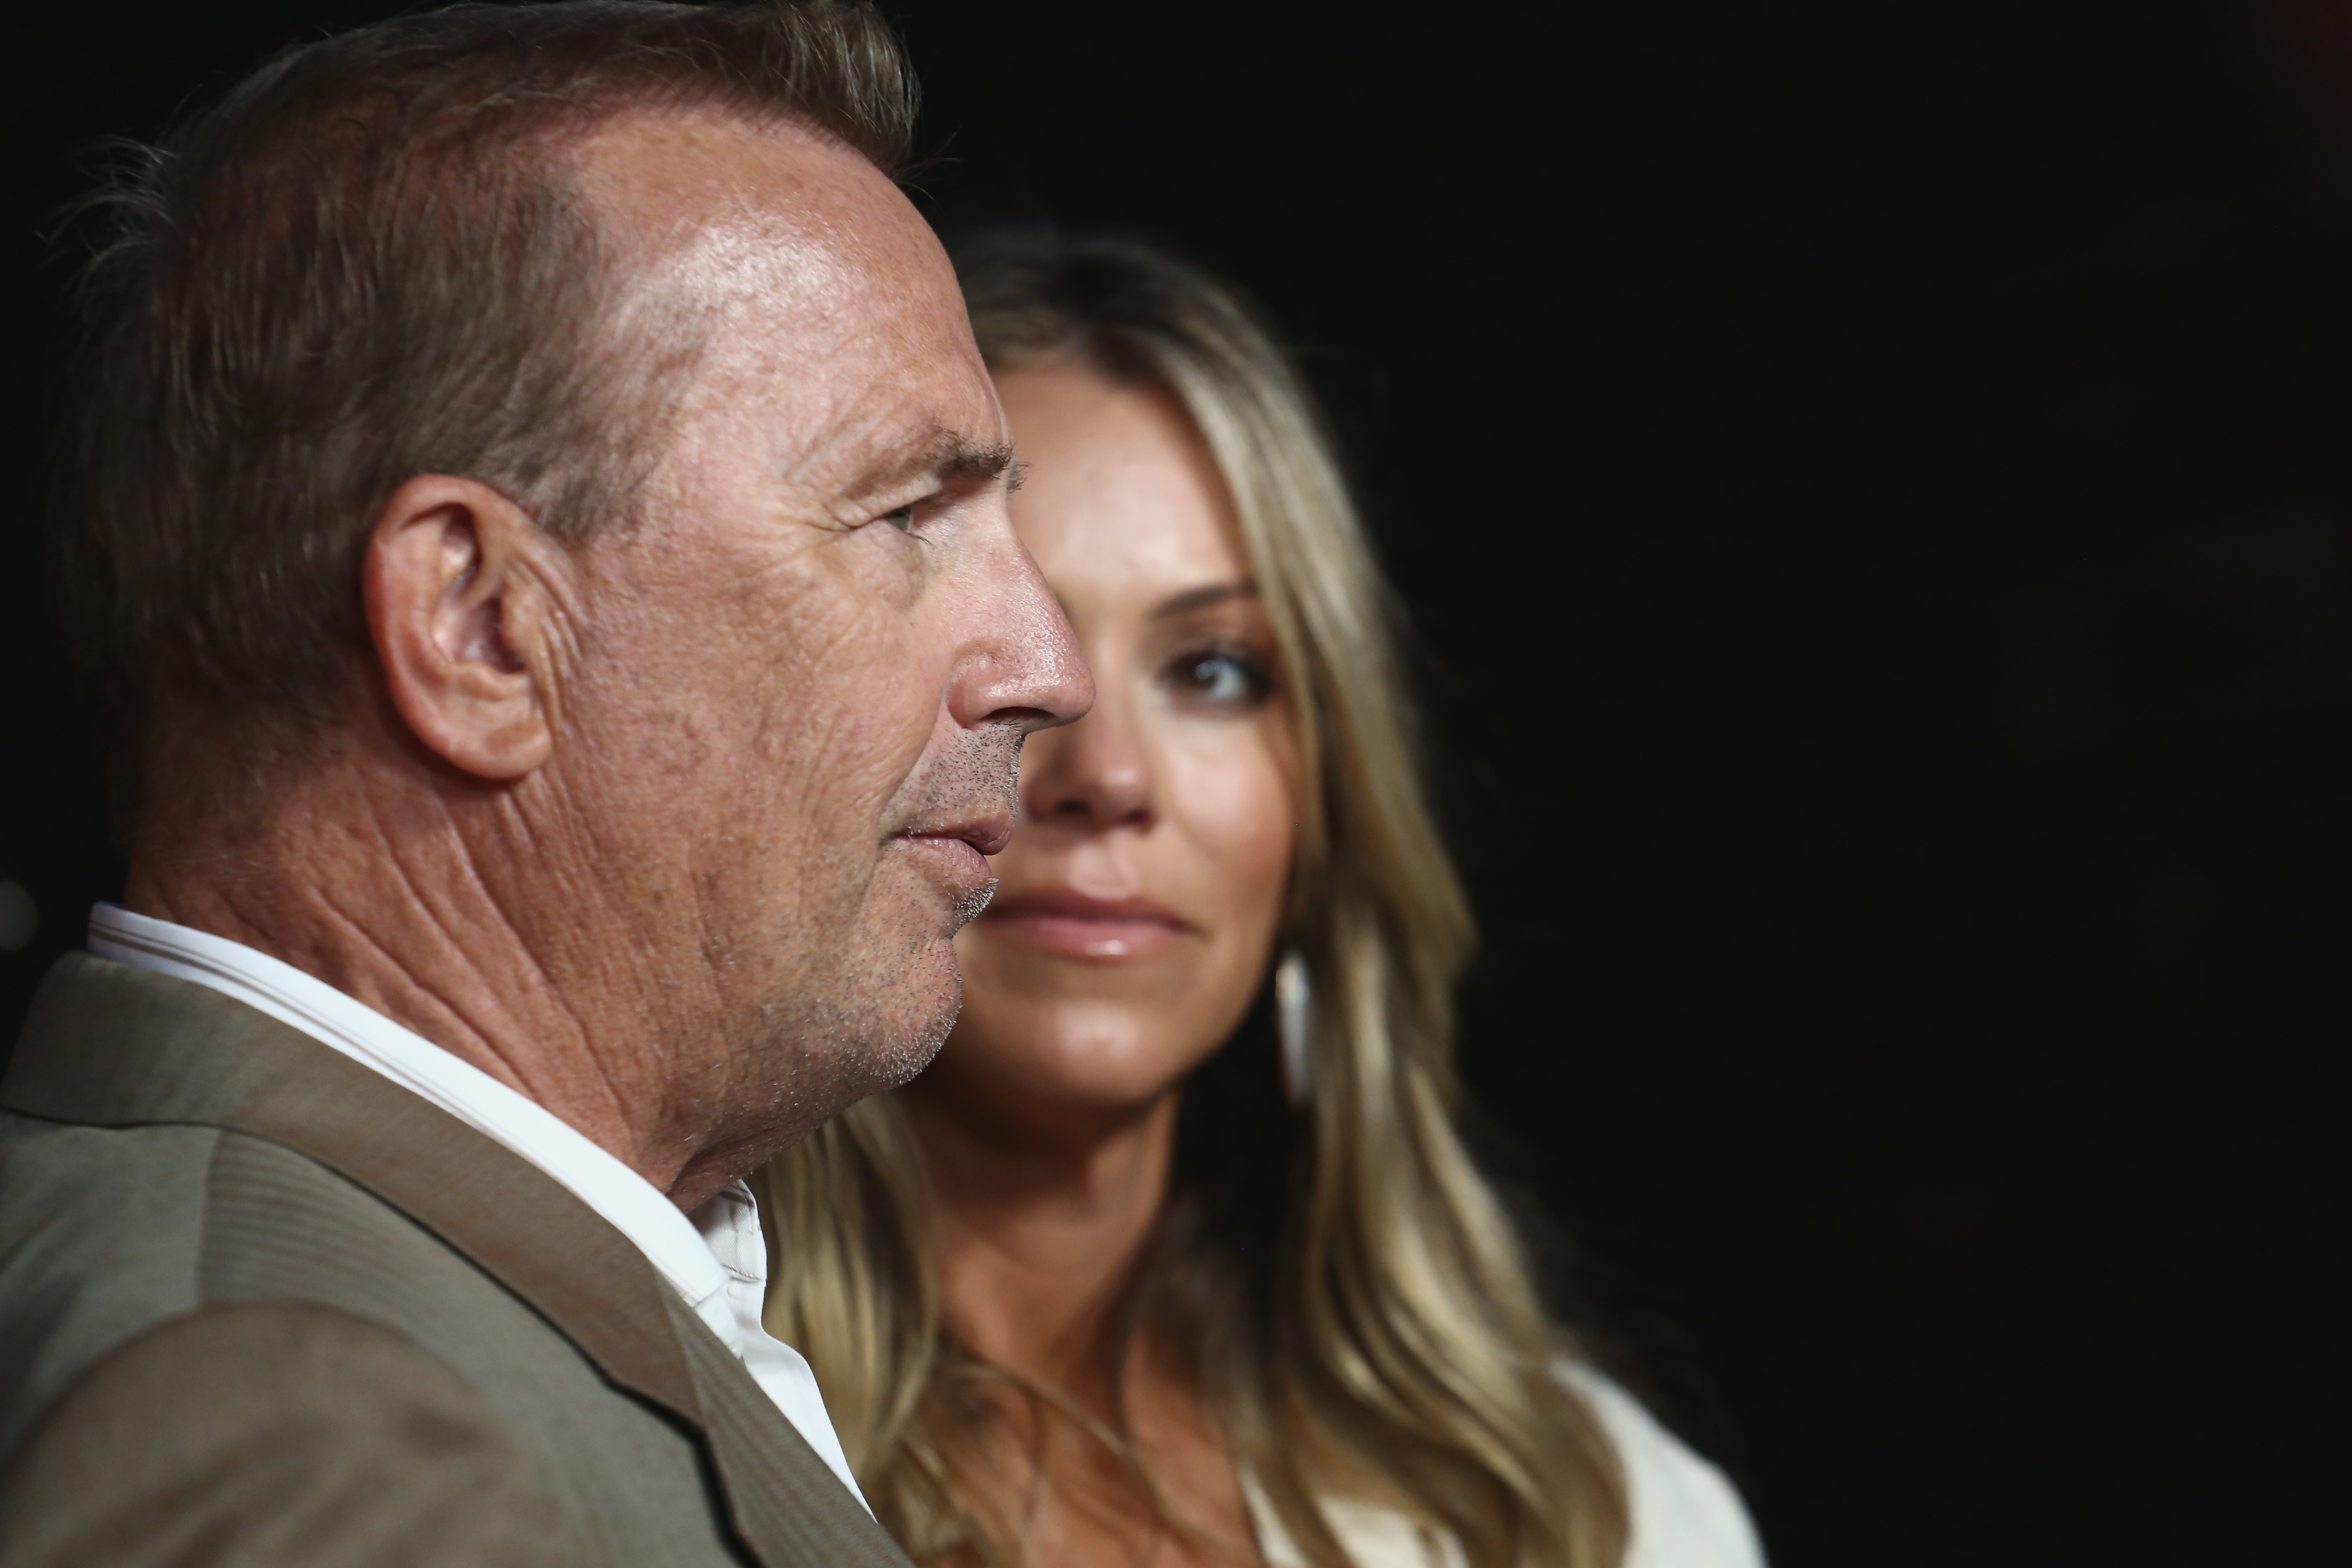 Kevin Costner and Christine Baumgartner attend an event on May 30, 2019 in Los Angeles, California. | Source: Getty Images